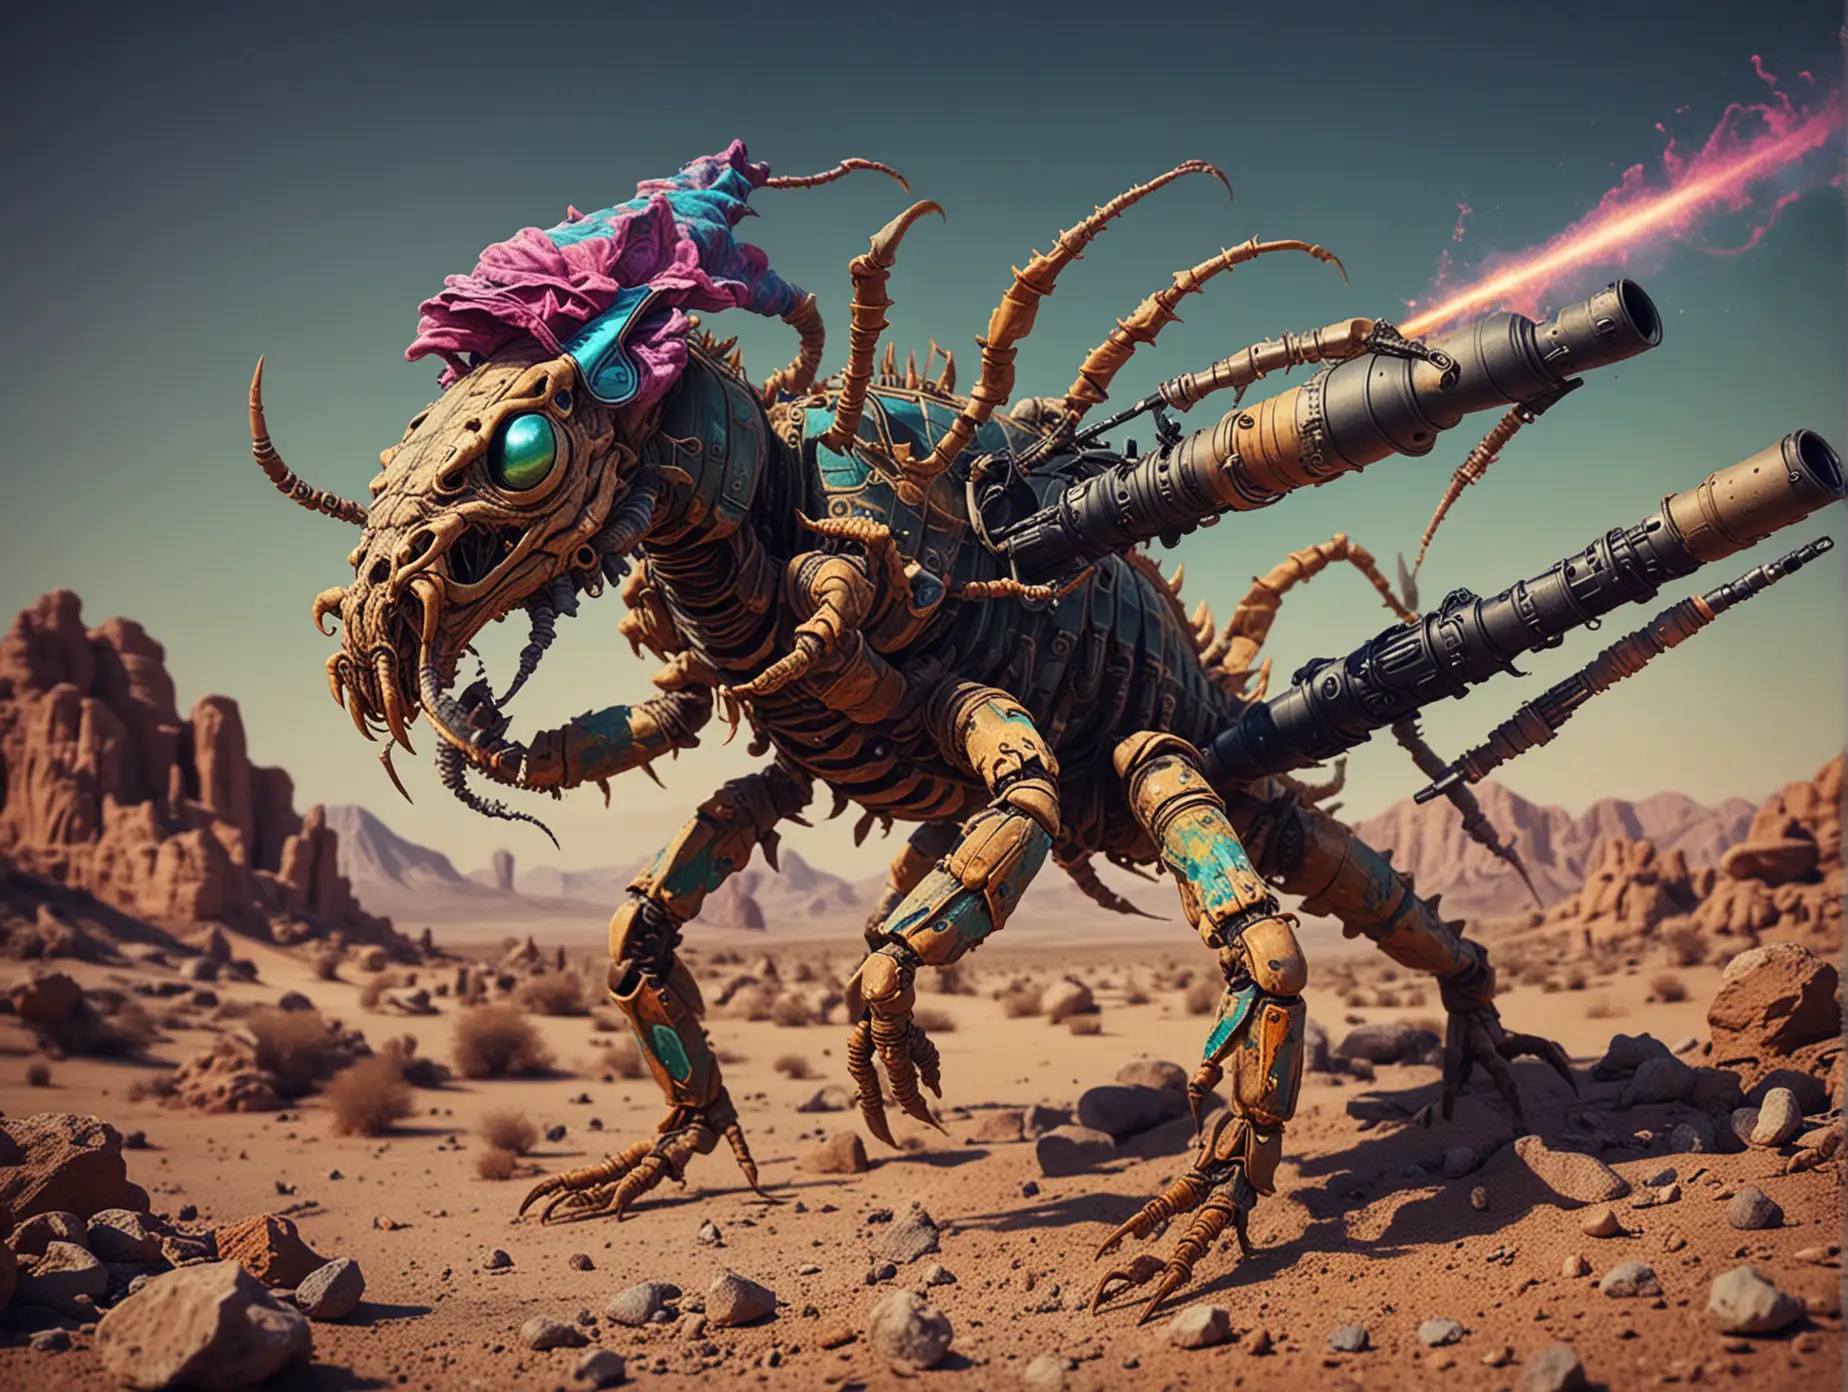 Psychedelic-Dimension-Strange-Creatures-and-Scorpion-with-Bazooka